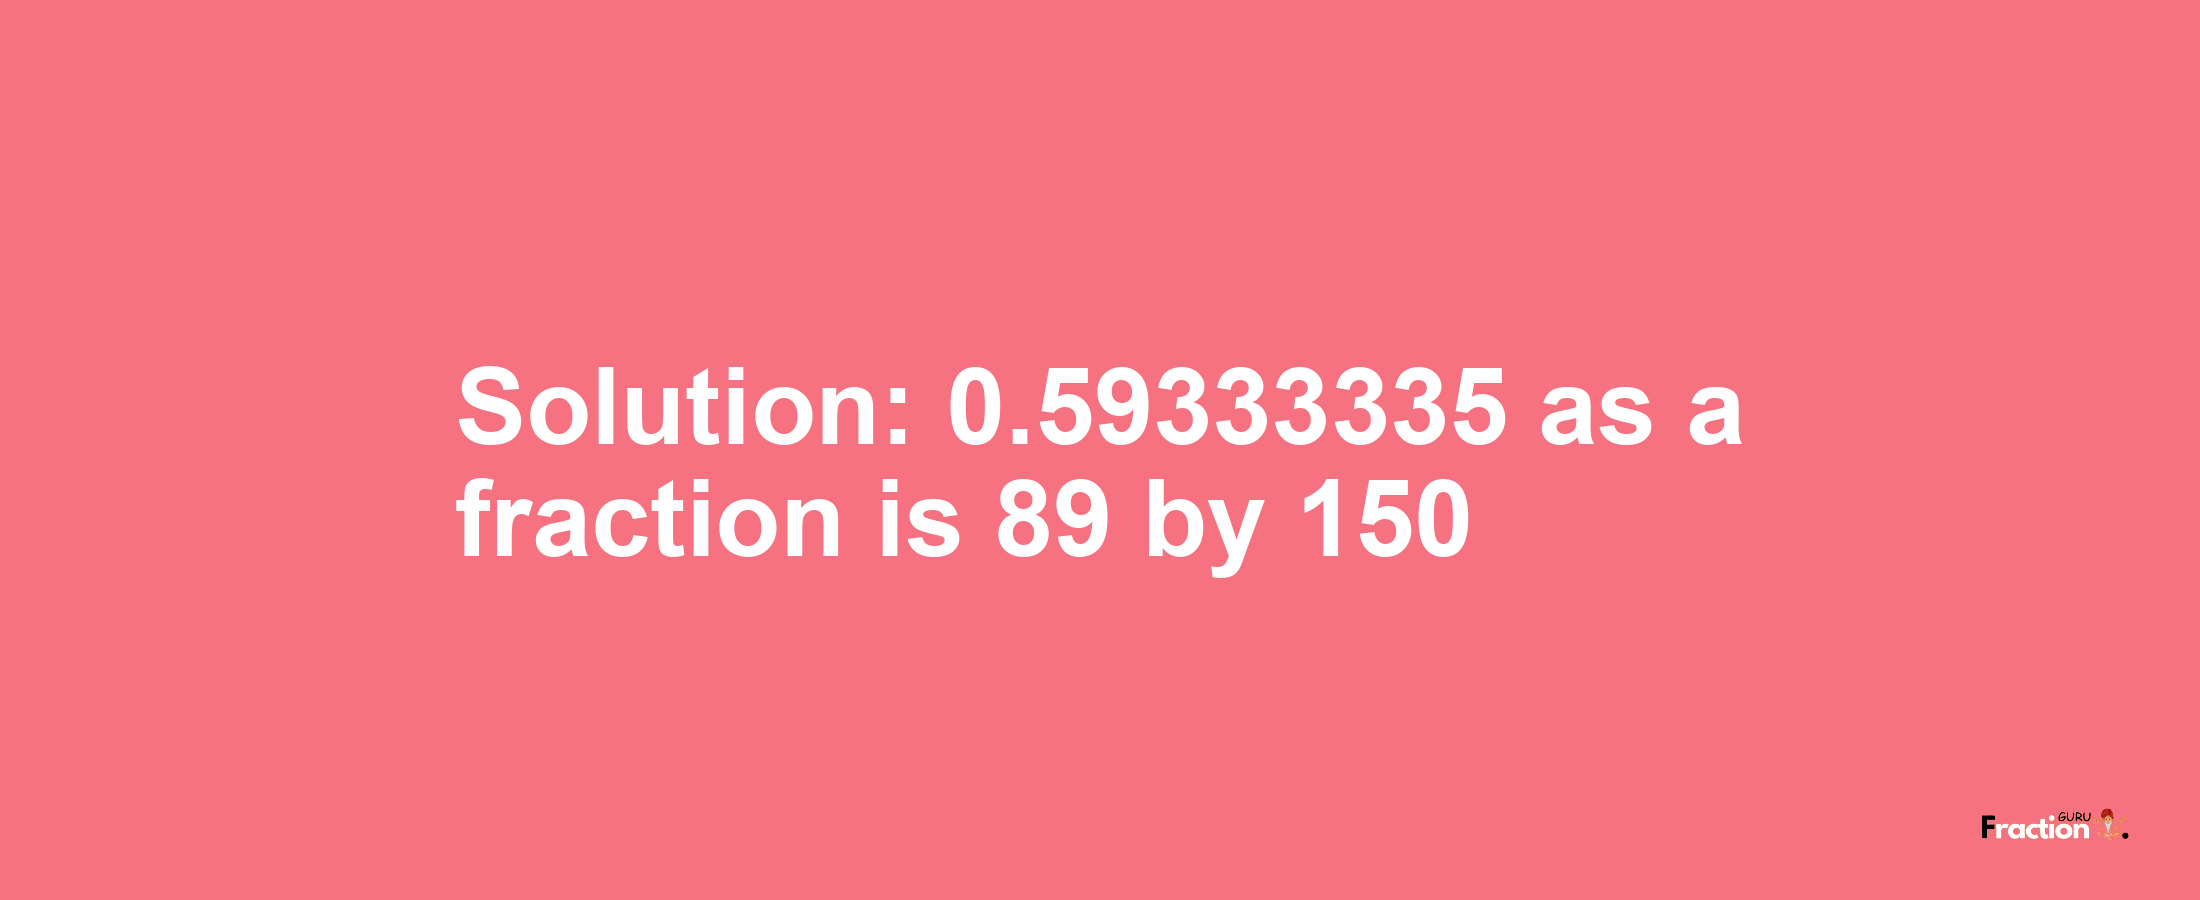 Solution:0.59333335 as a fraction is 89/150